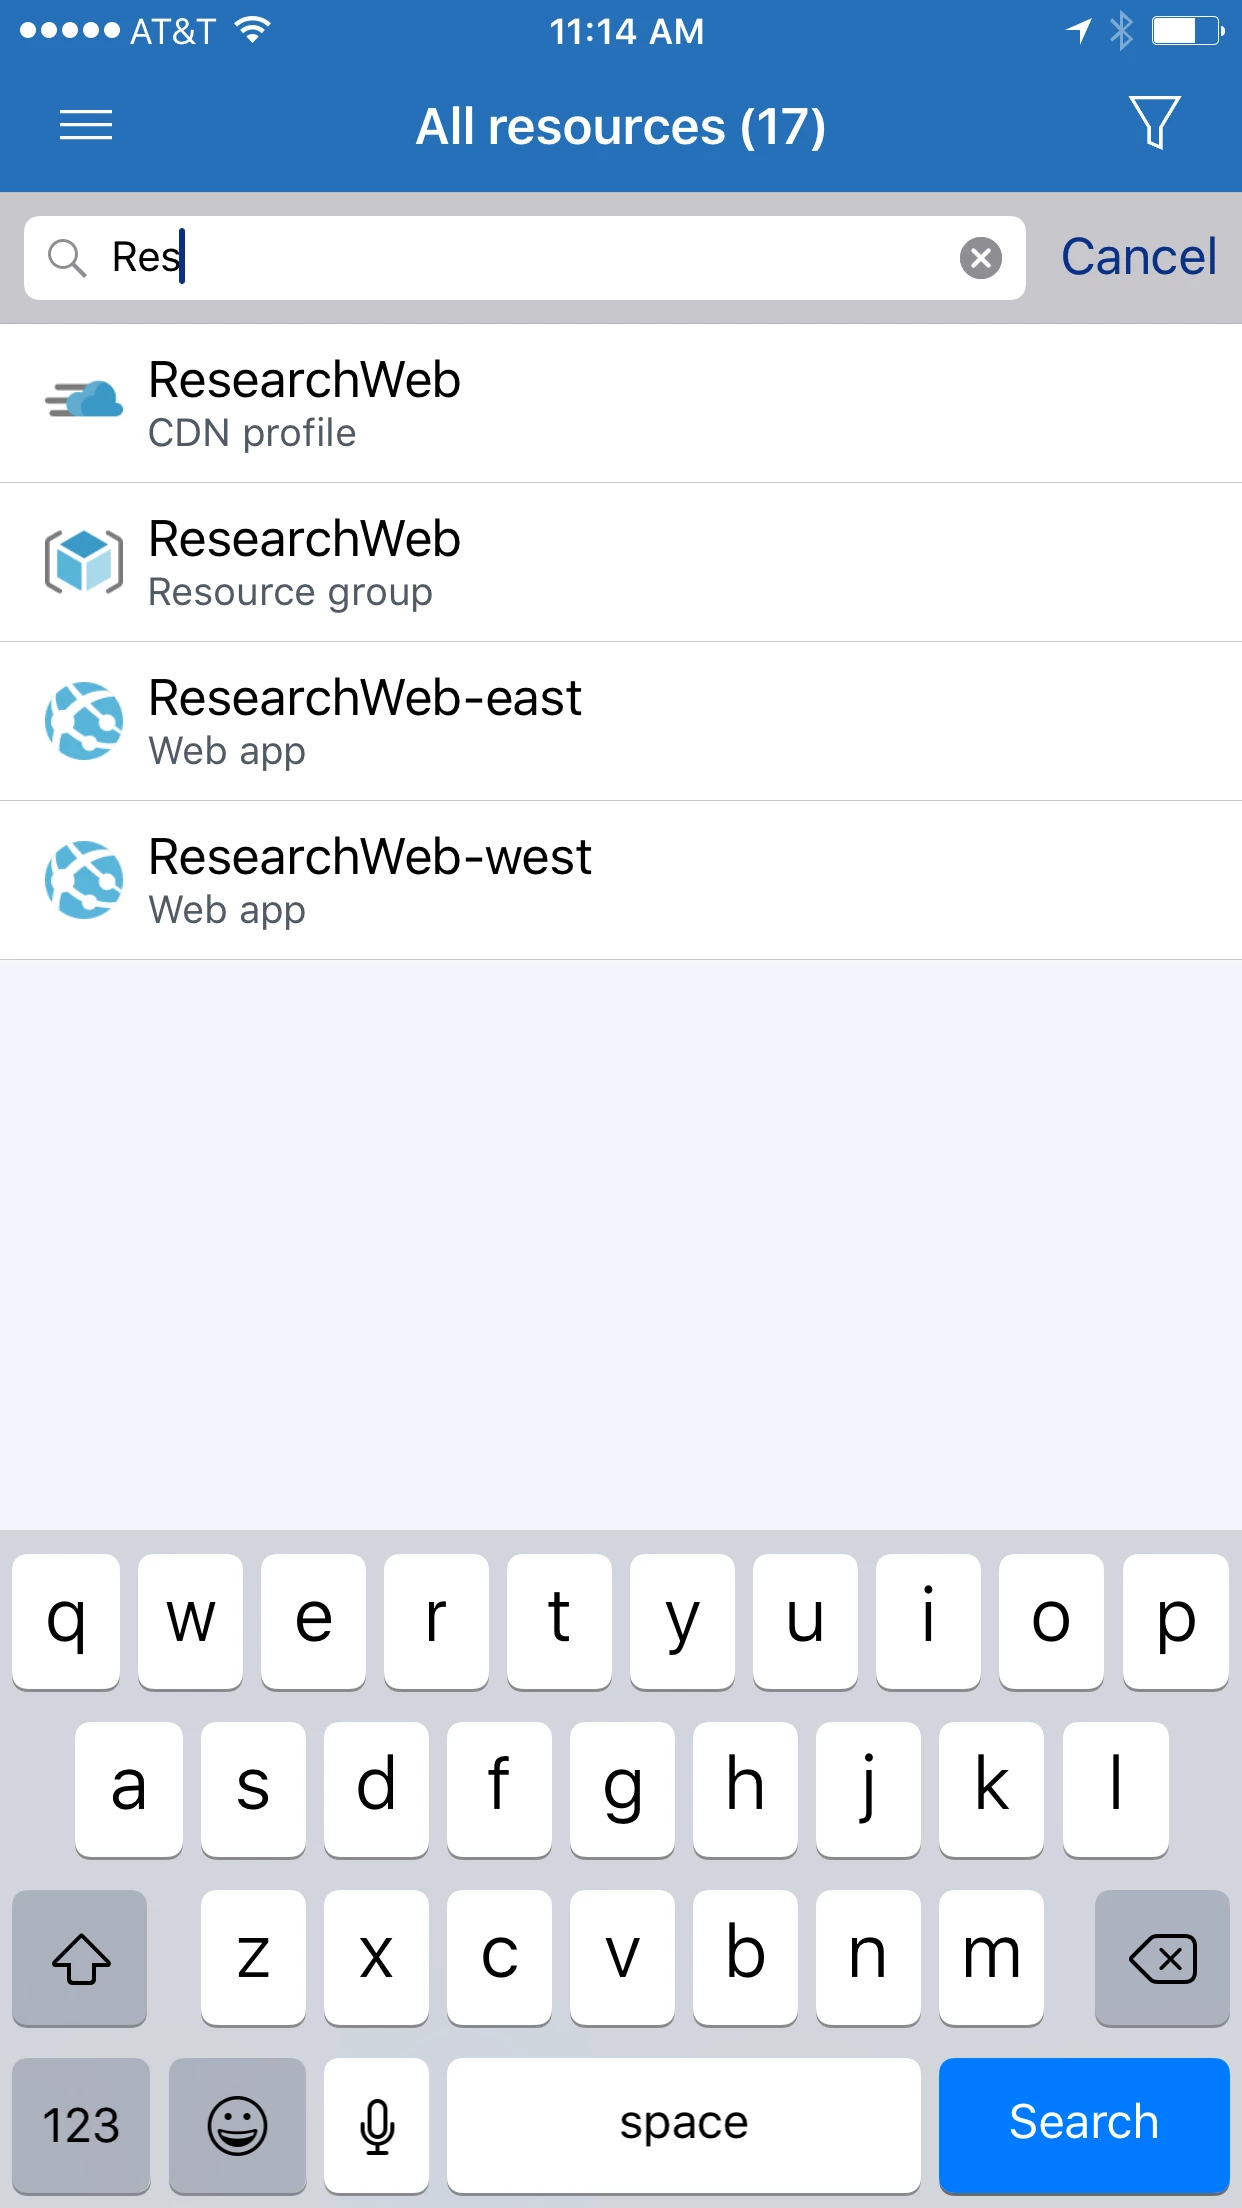 Search for resources and resource groups by name